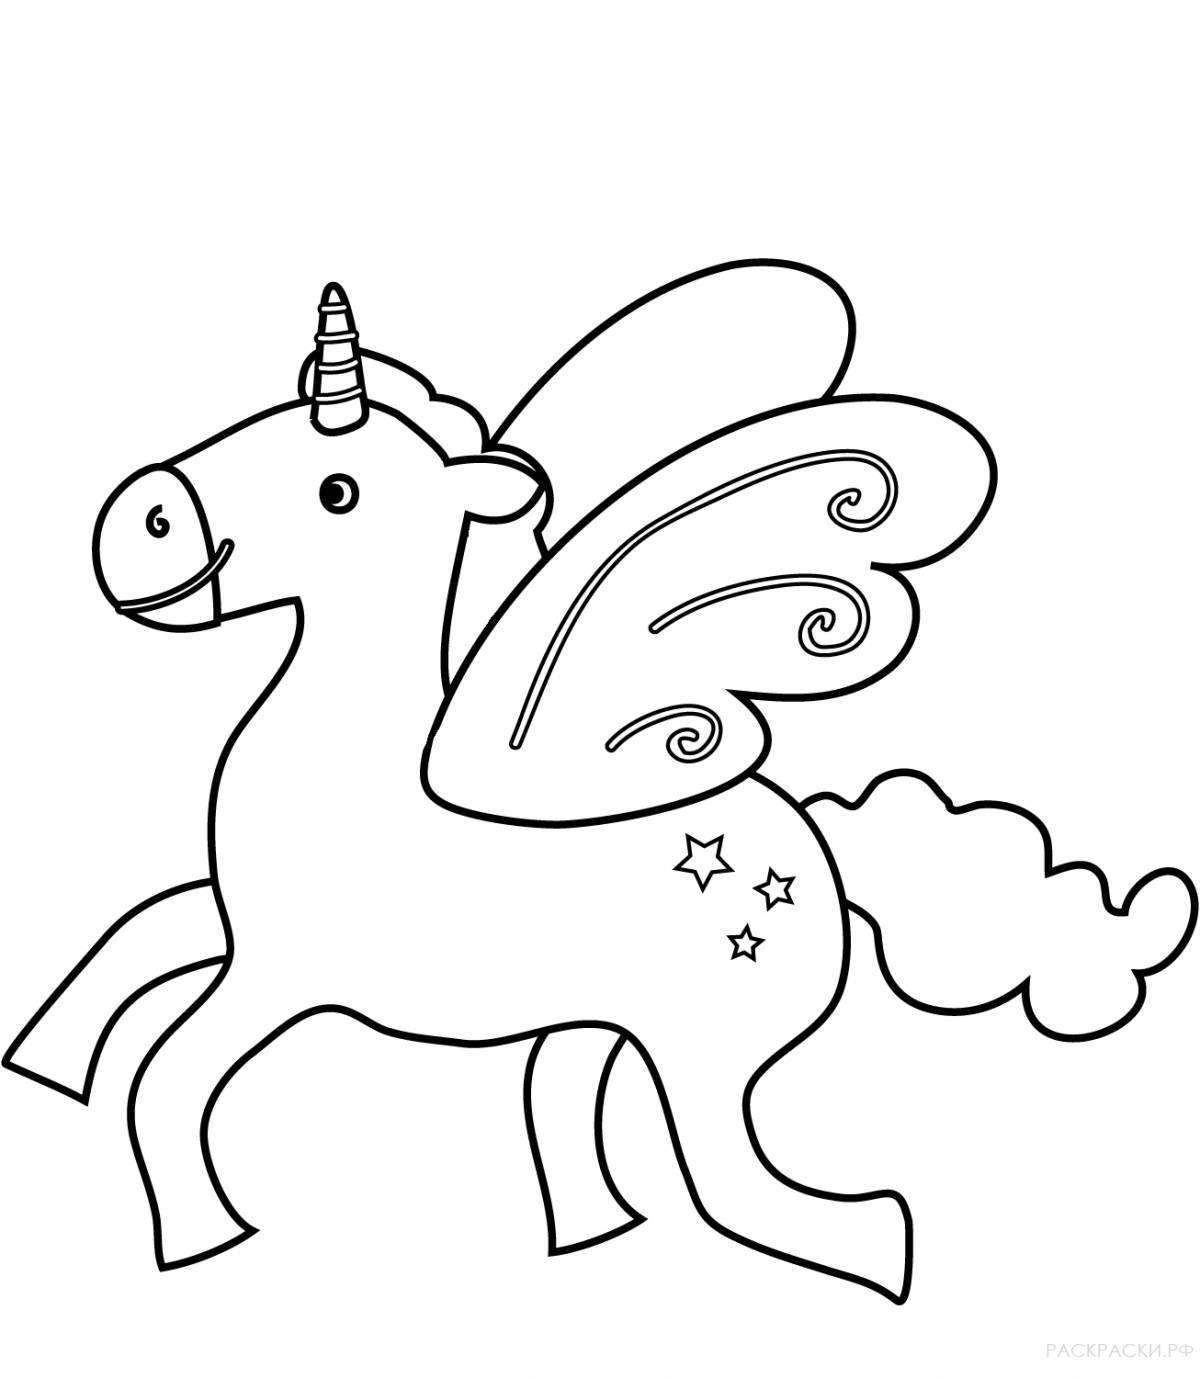 Coloring page magical flying unicorns